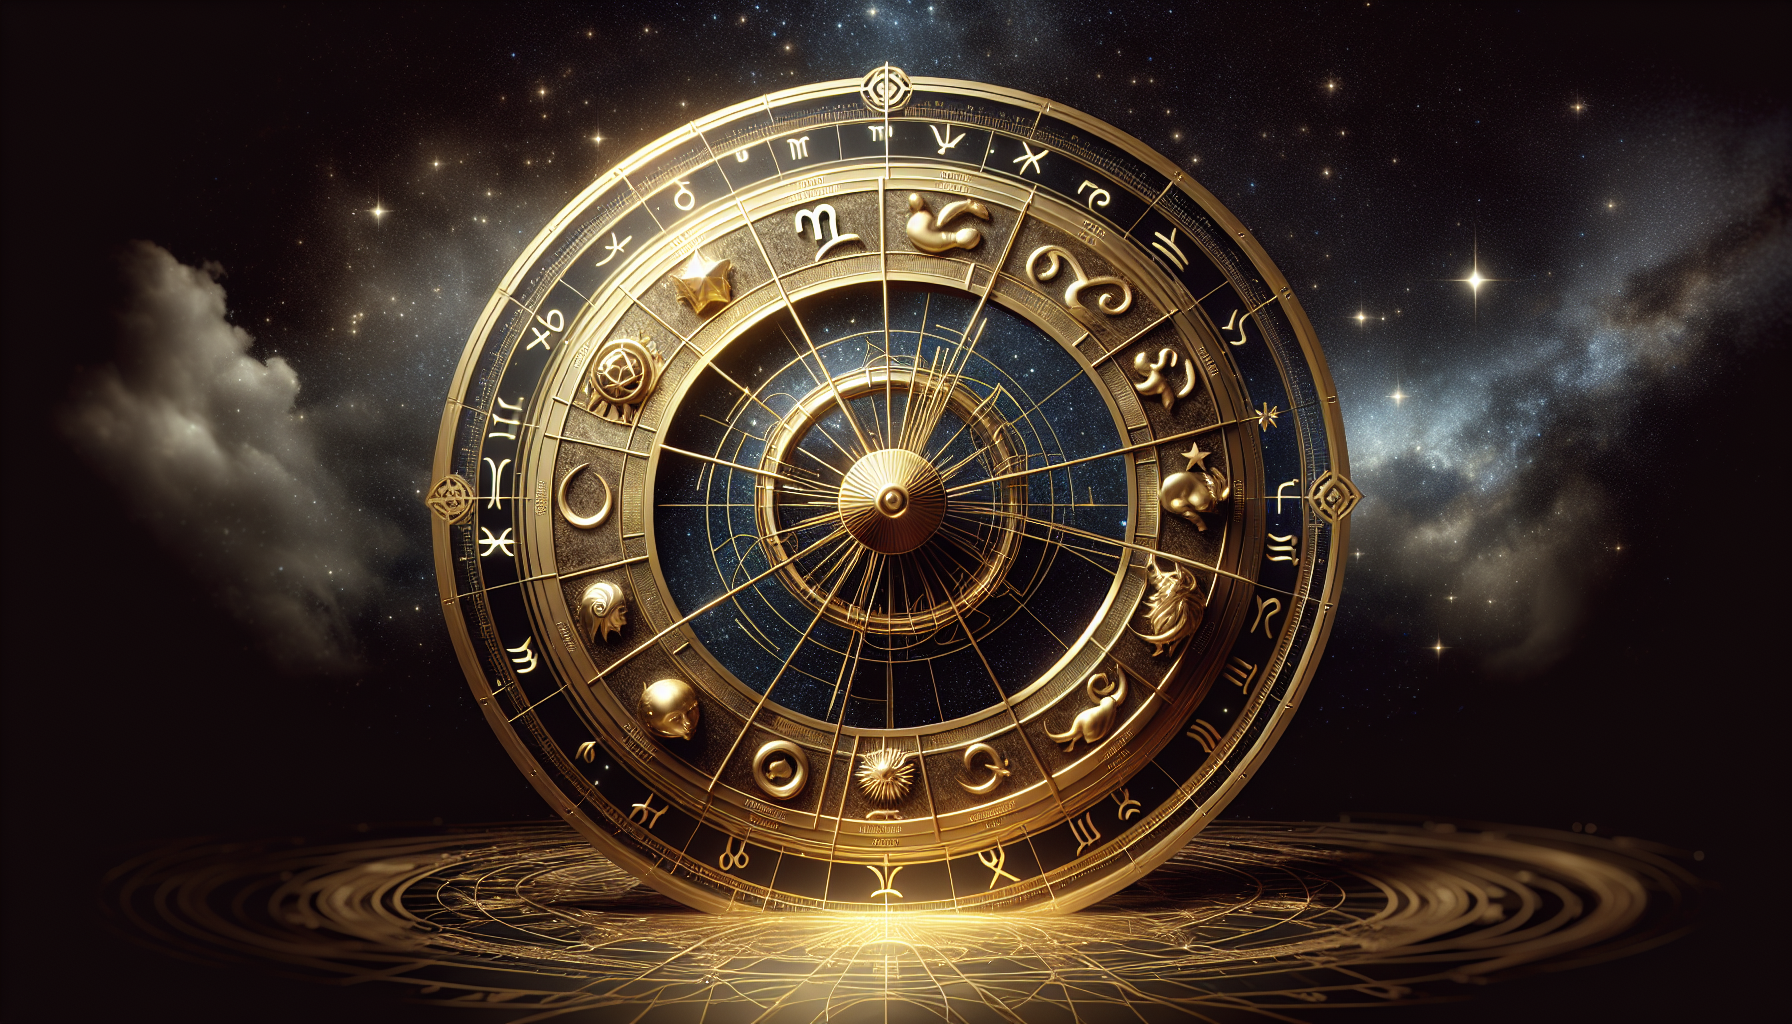 What Is The 12 Zodiac Sign?